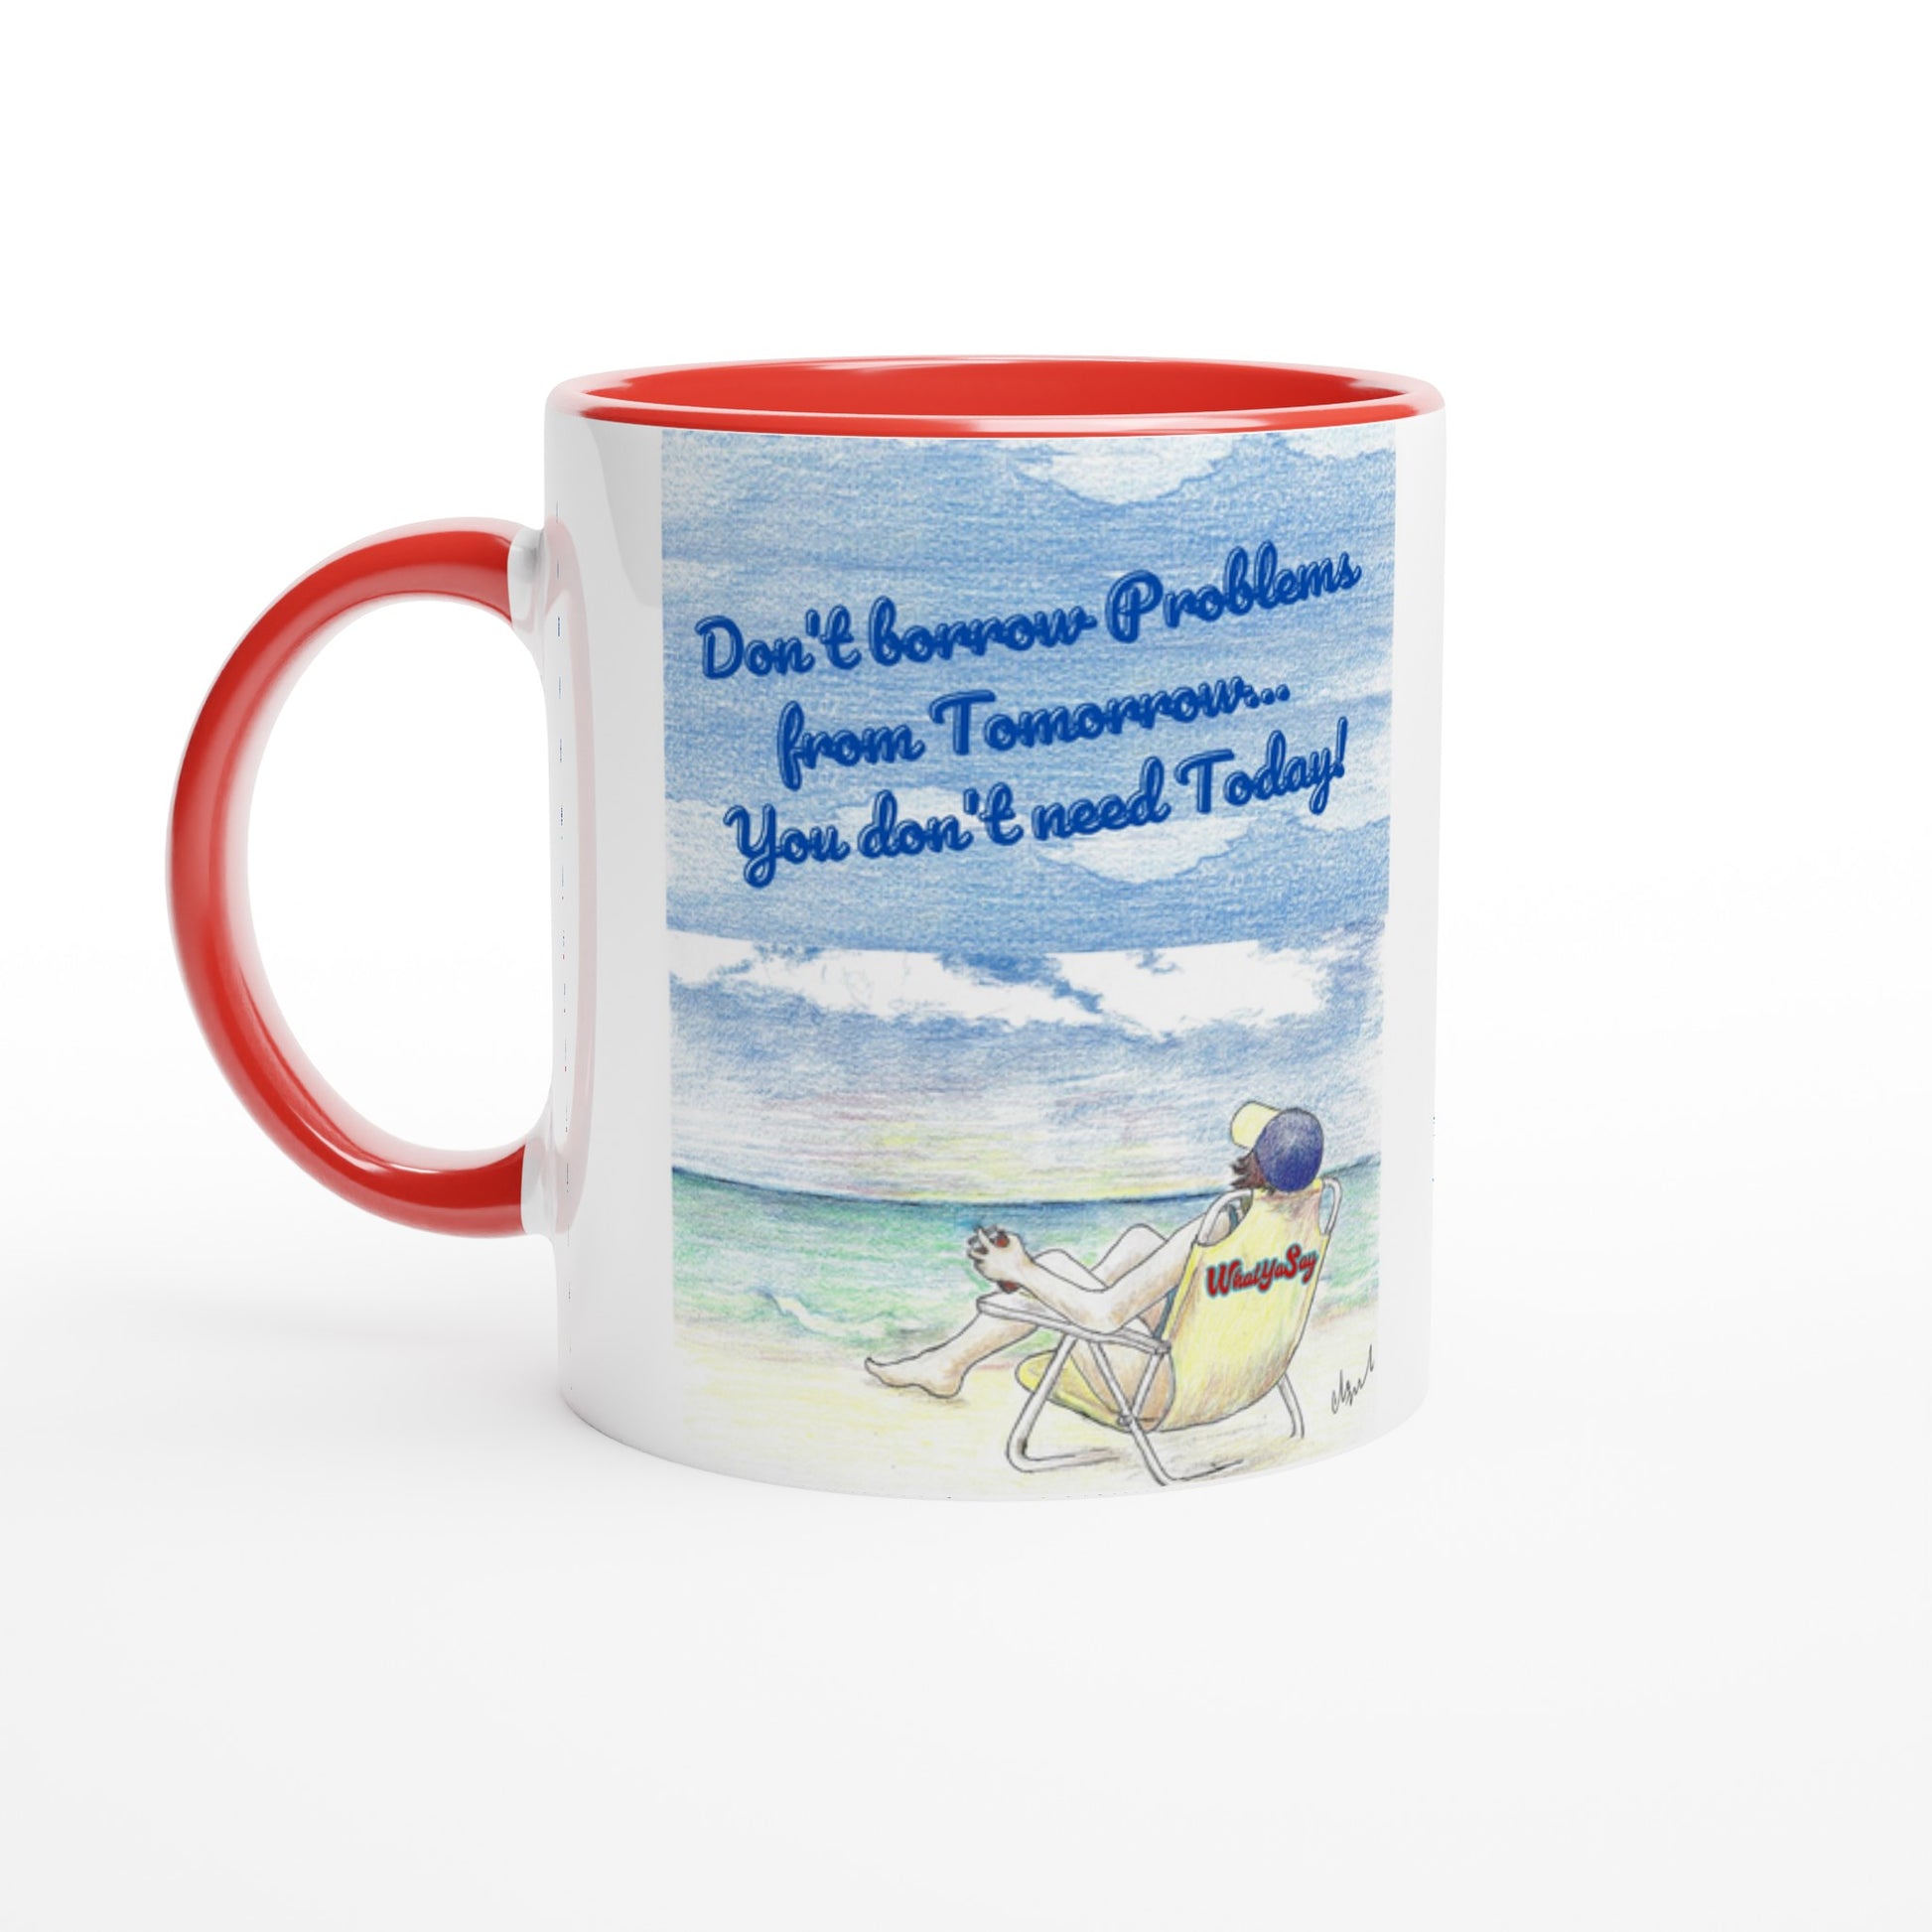 Funny saying Don't borrow Problems from Tomorrow... You don't need Today! 11oz white ceramic mug with red handle, rim and inside and coffee mug is dishwasher safe and microwave safe.